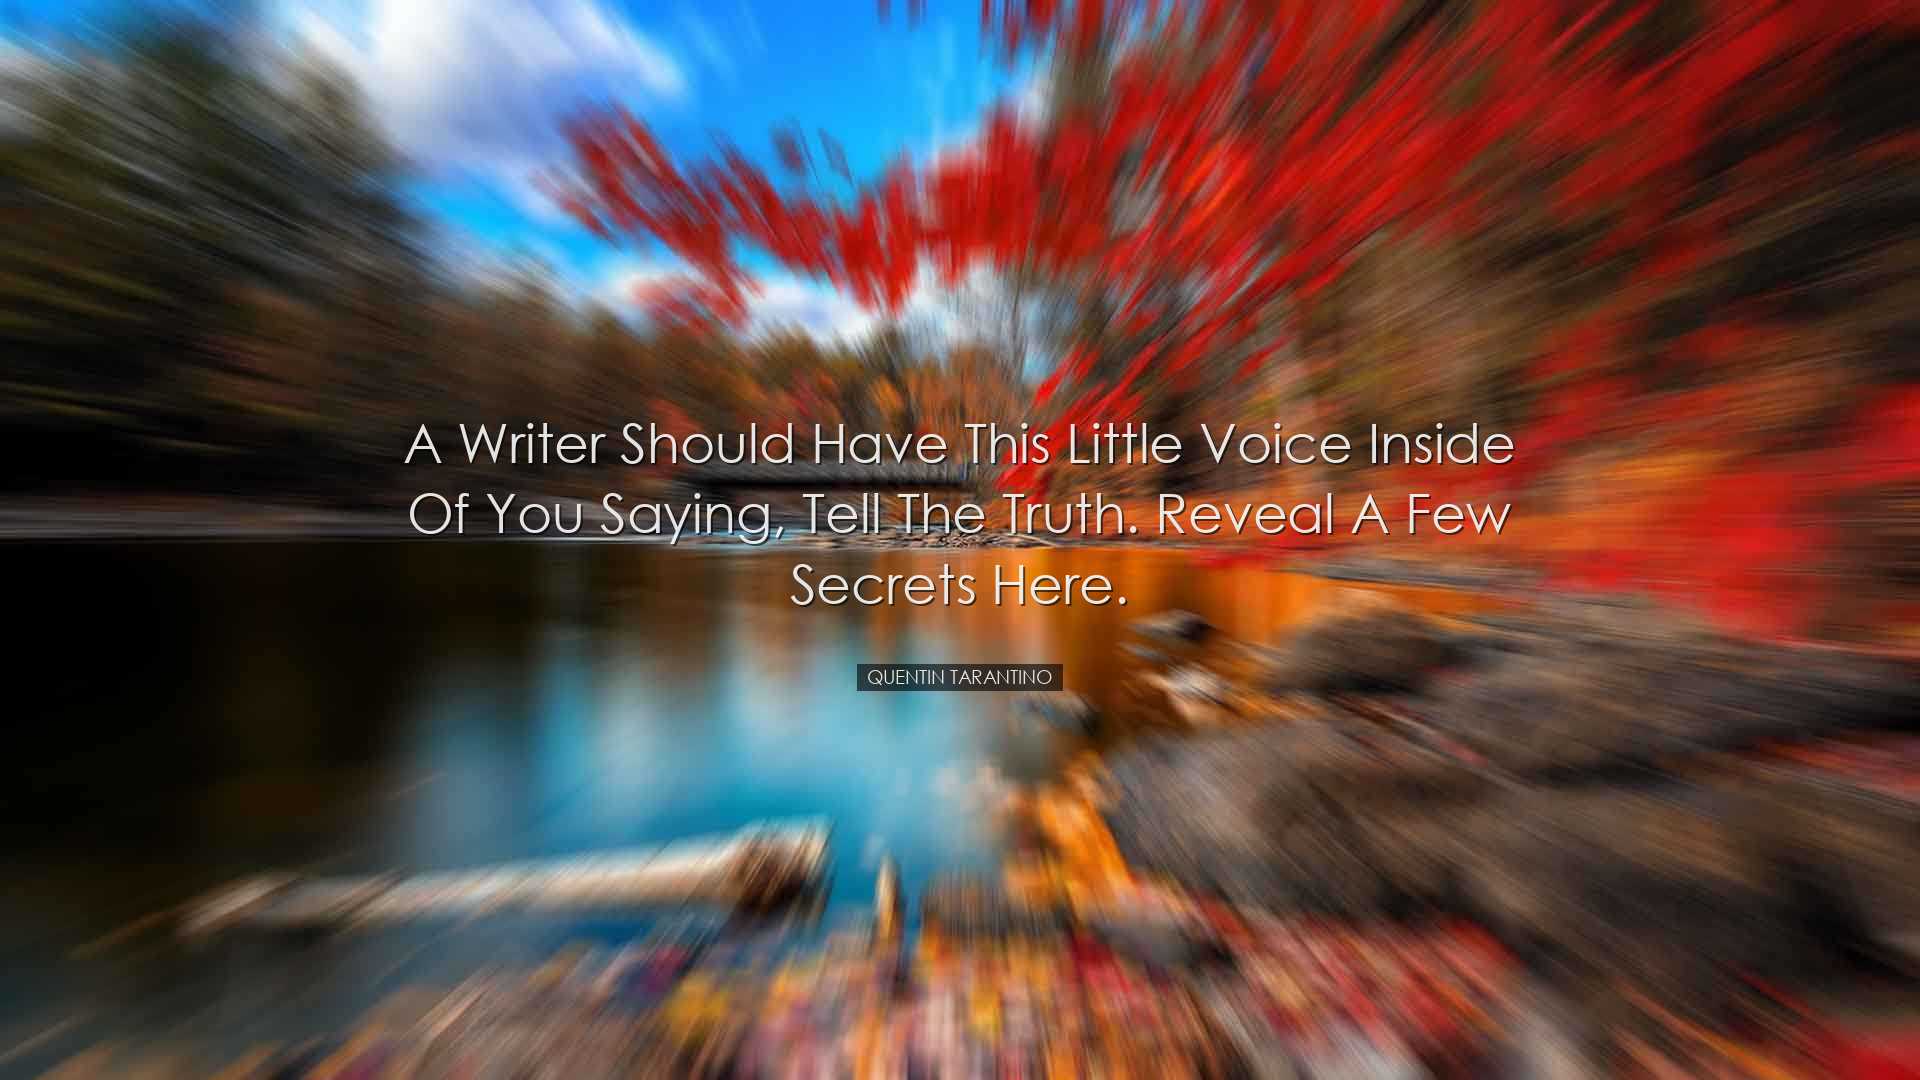 A writer should have this little voice inside of you saying, Tell